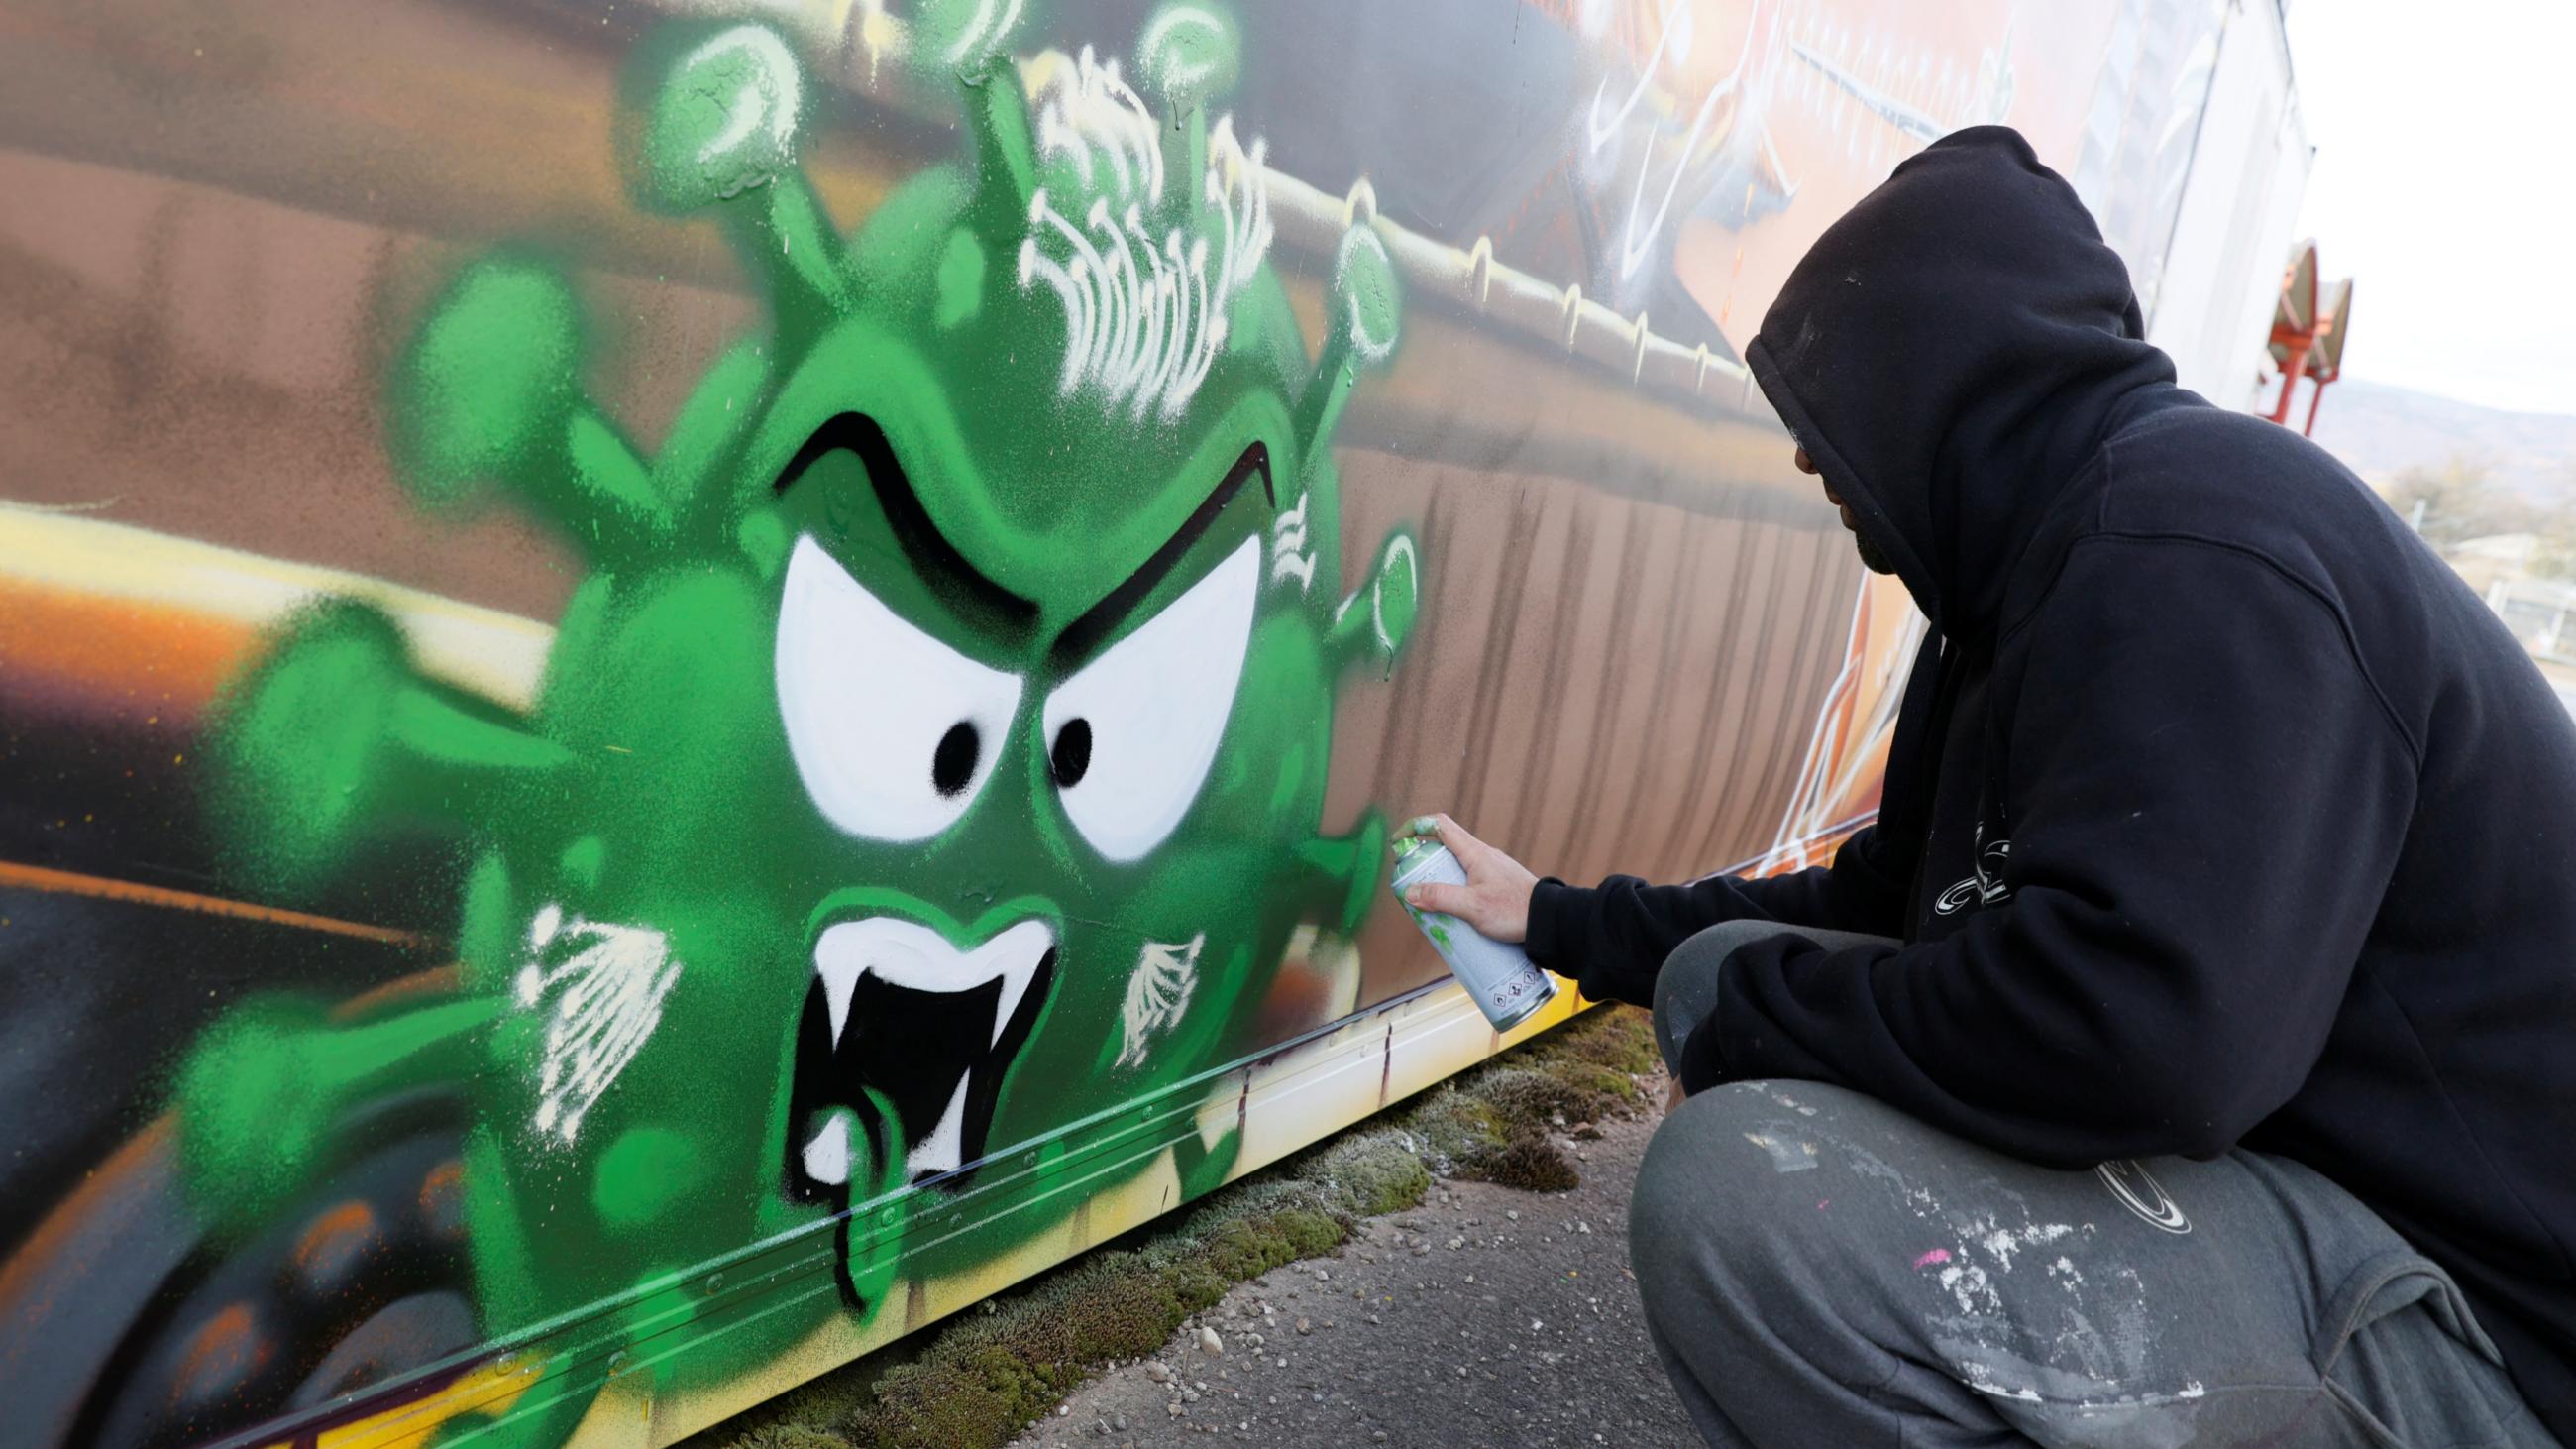 Artist David "S.I.D." Perez spray paints an image representing two vaccines fighting against a virus, in Gland, Switzerland, on December 3, 2020.